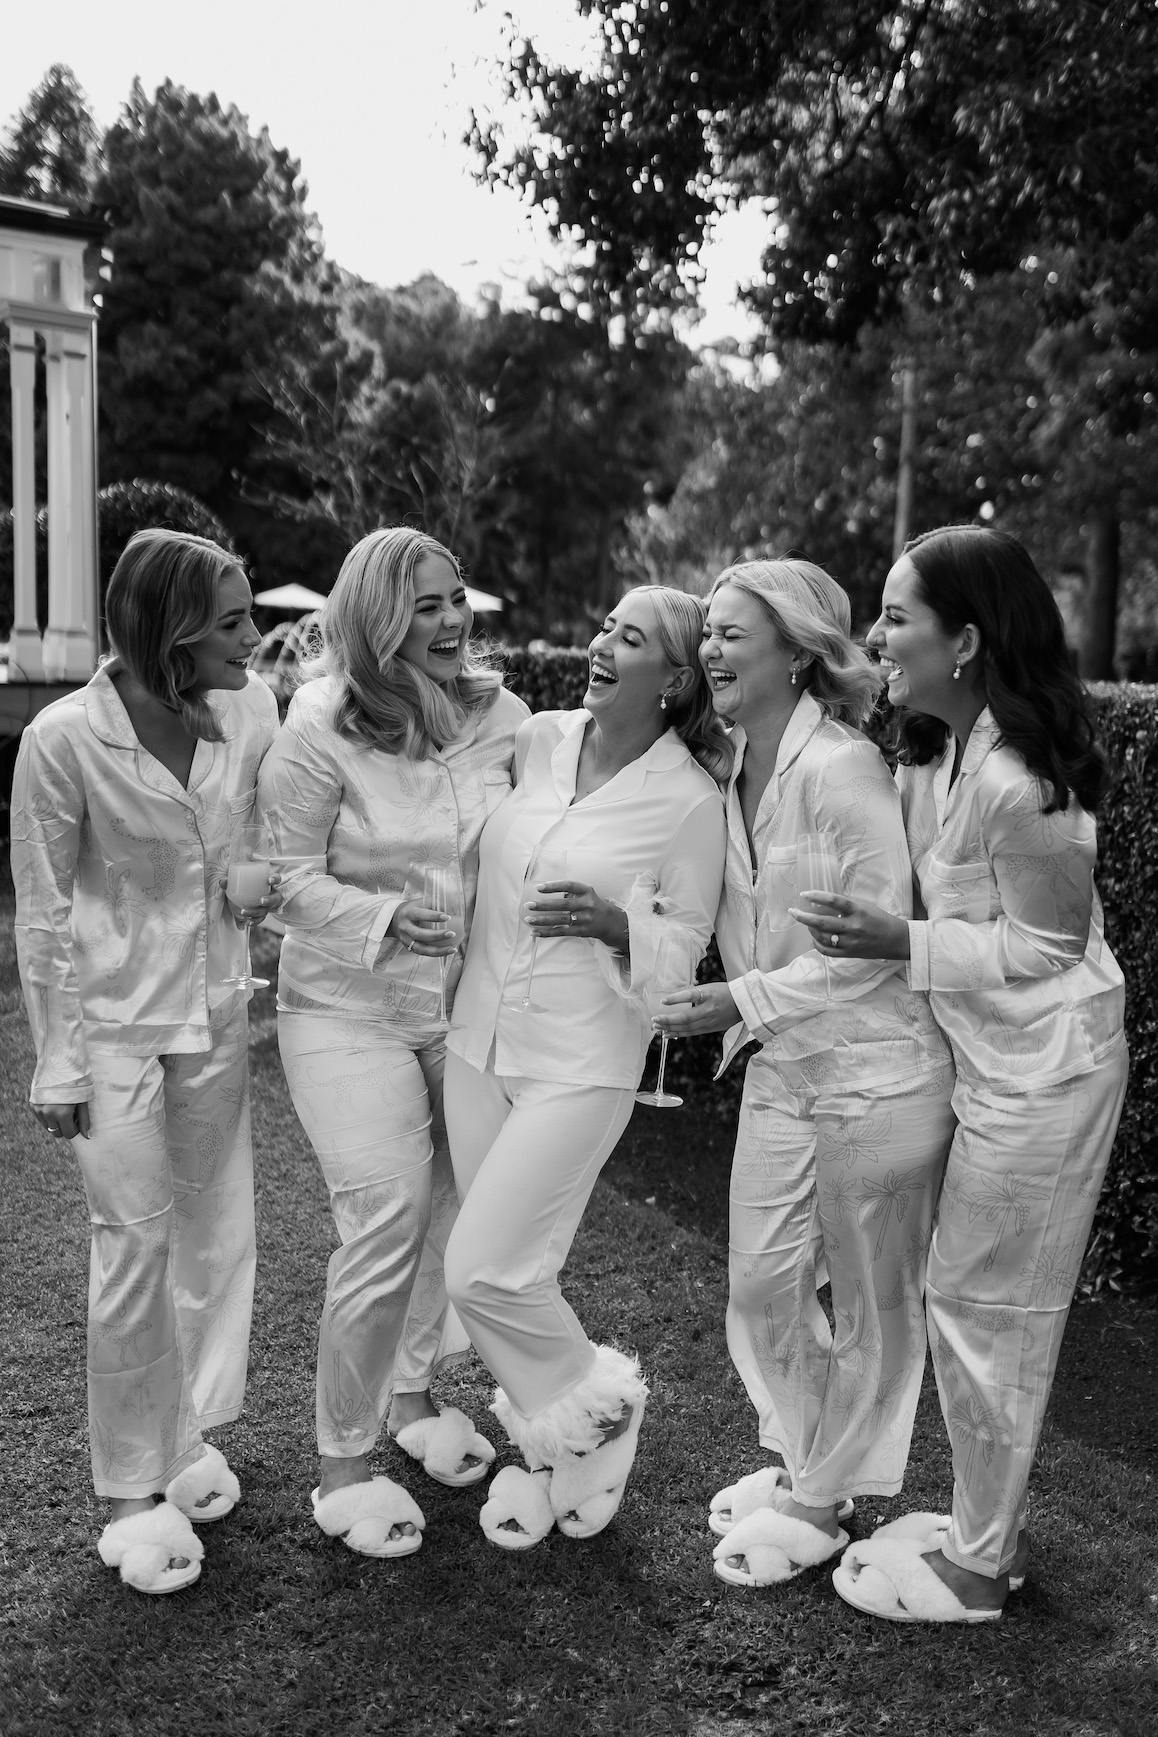 A group of five women dressed in matching white pajamas and fluffy slippers stand outdoors, joyfully laughing and talking. Some are holding champagne glasses. The background features trees and part of a building. The scene is in black and white.